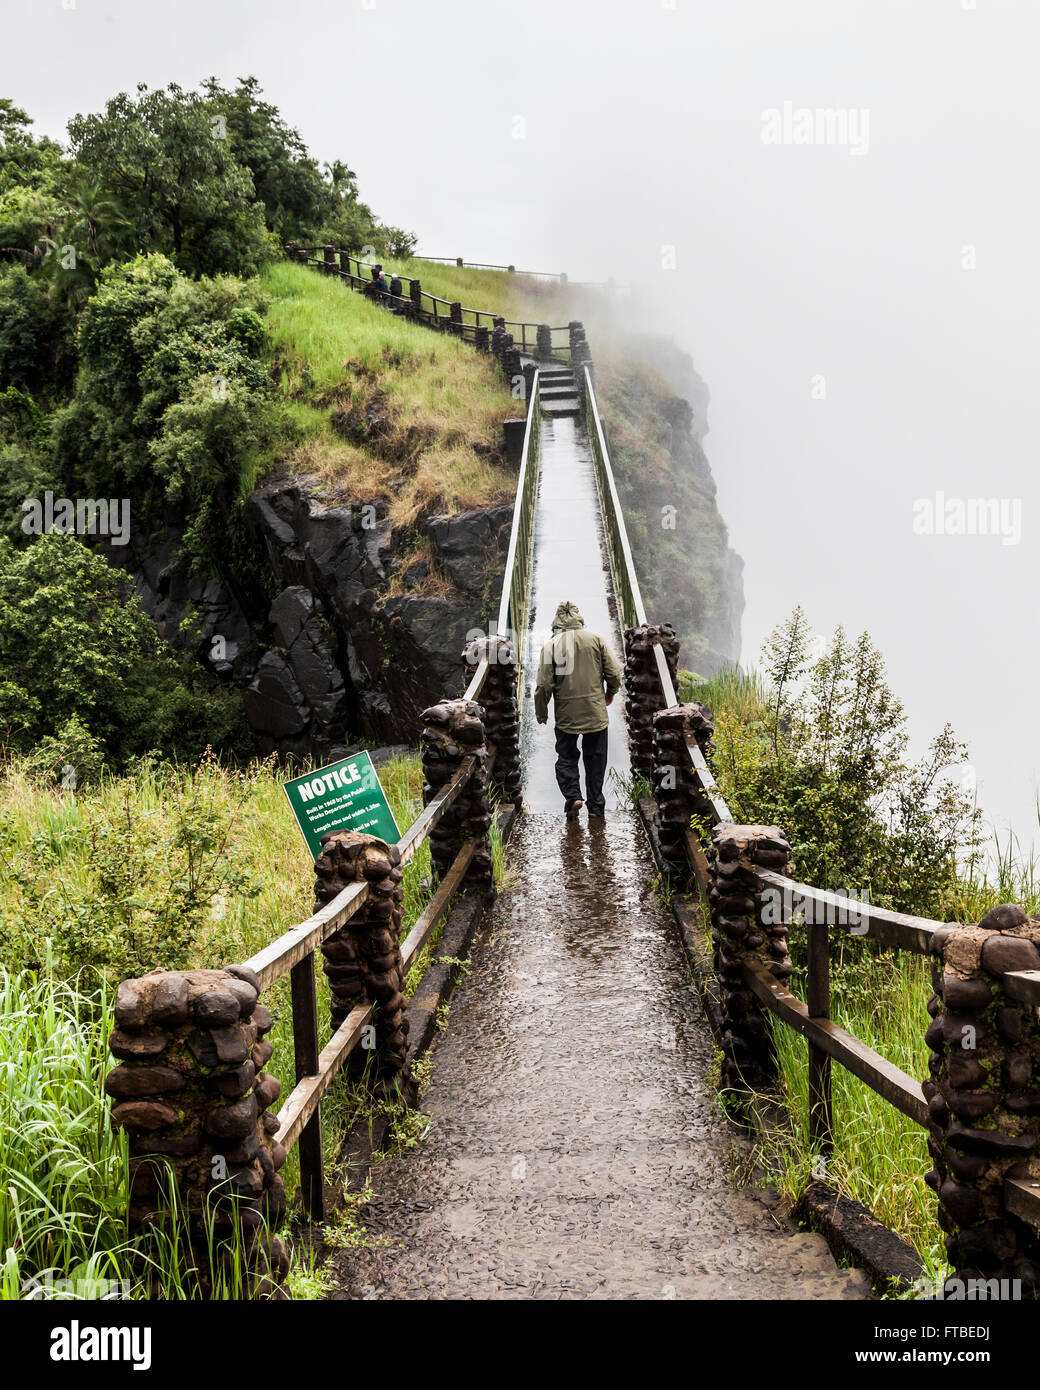 Tousist in rainwear at Knife Edge Bridge at Mosi-oa-Tunya (Victoria Falls) with heavy spray obscuring the view of the Falls. Stock Photo